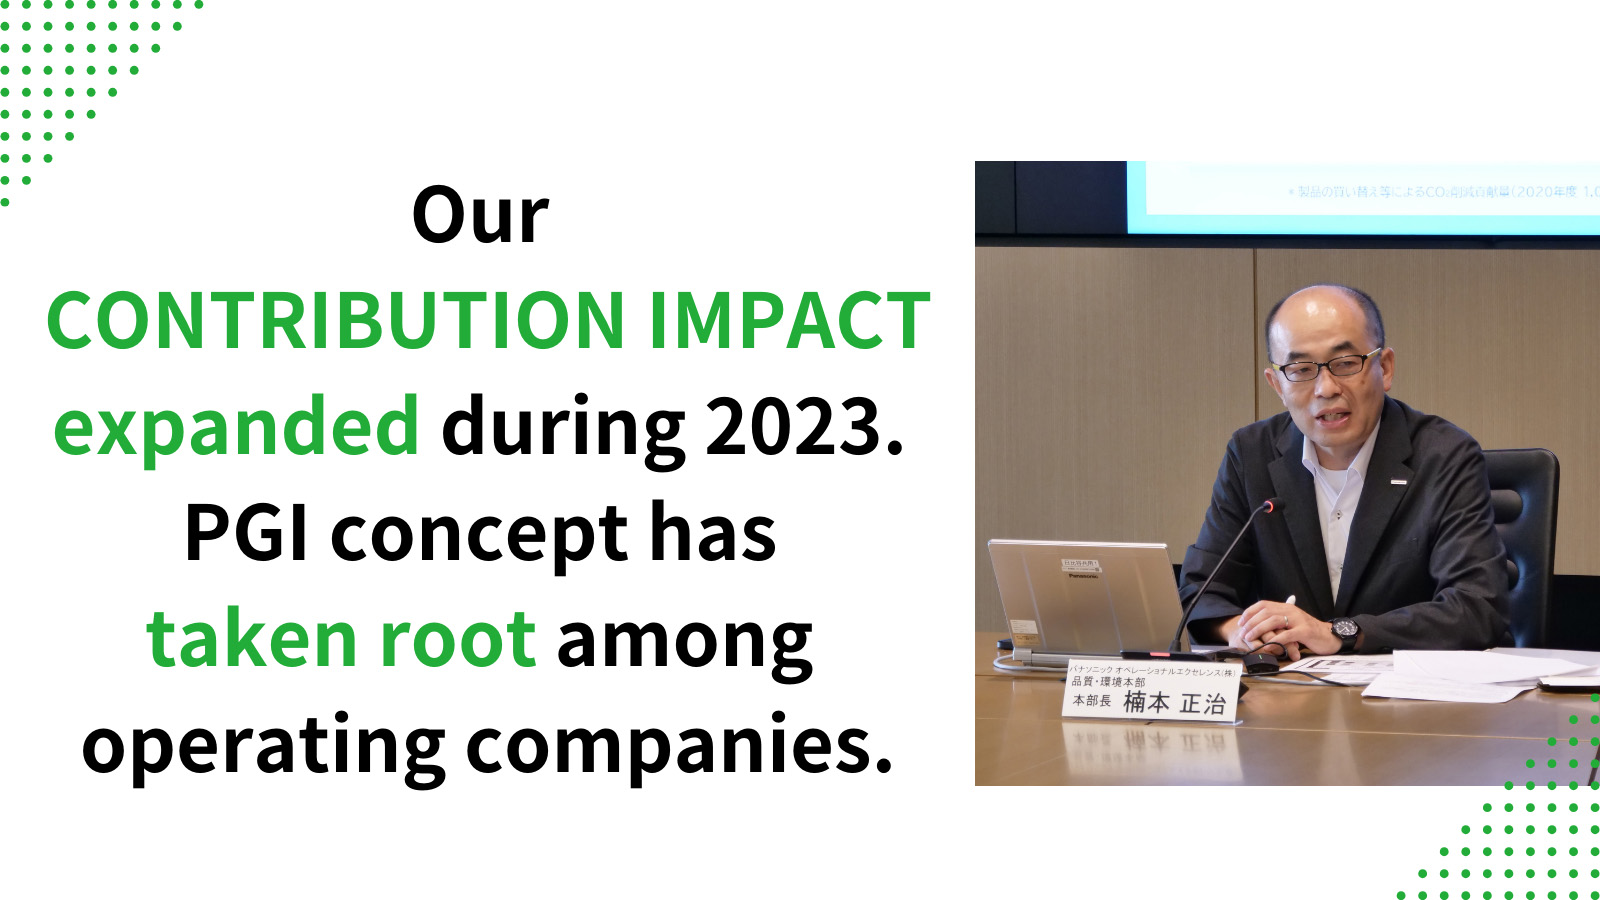 Photo: Shoji Kusumoto providing an overview of Sustainability Data Book 2023 during the press event held in August.